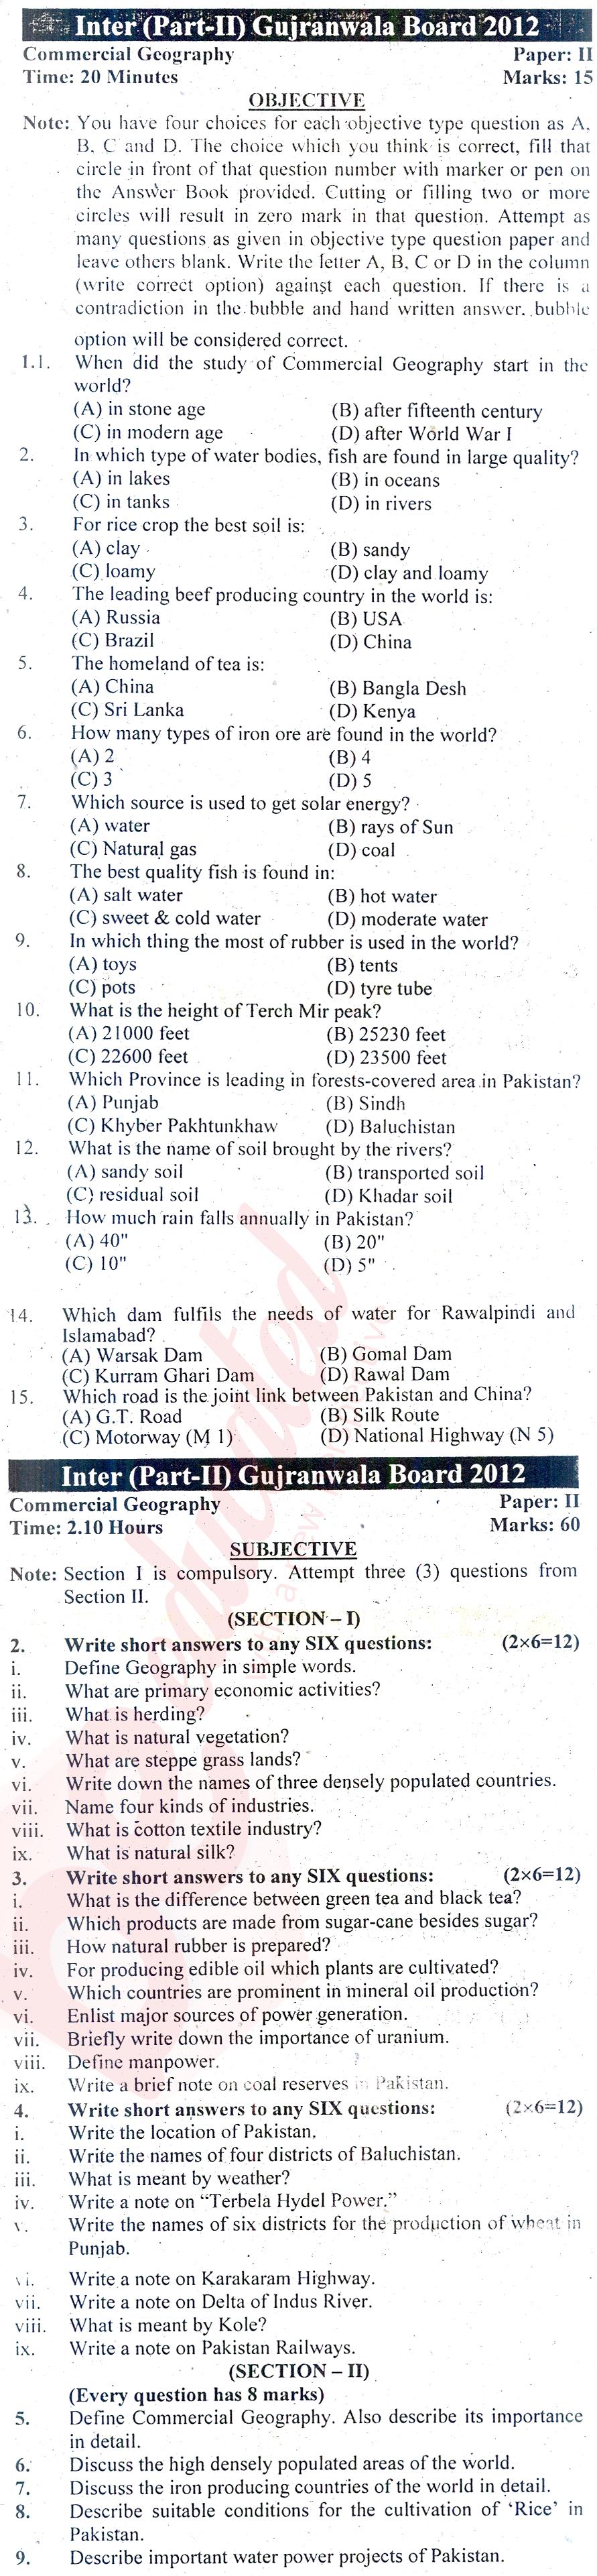 Commercial Geography ICOM Part 2 Past Paper Group 1 BISE Gujranwala 2012